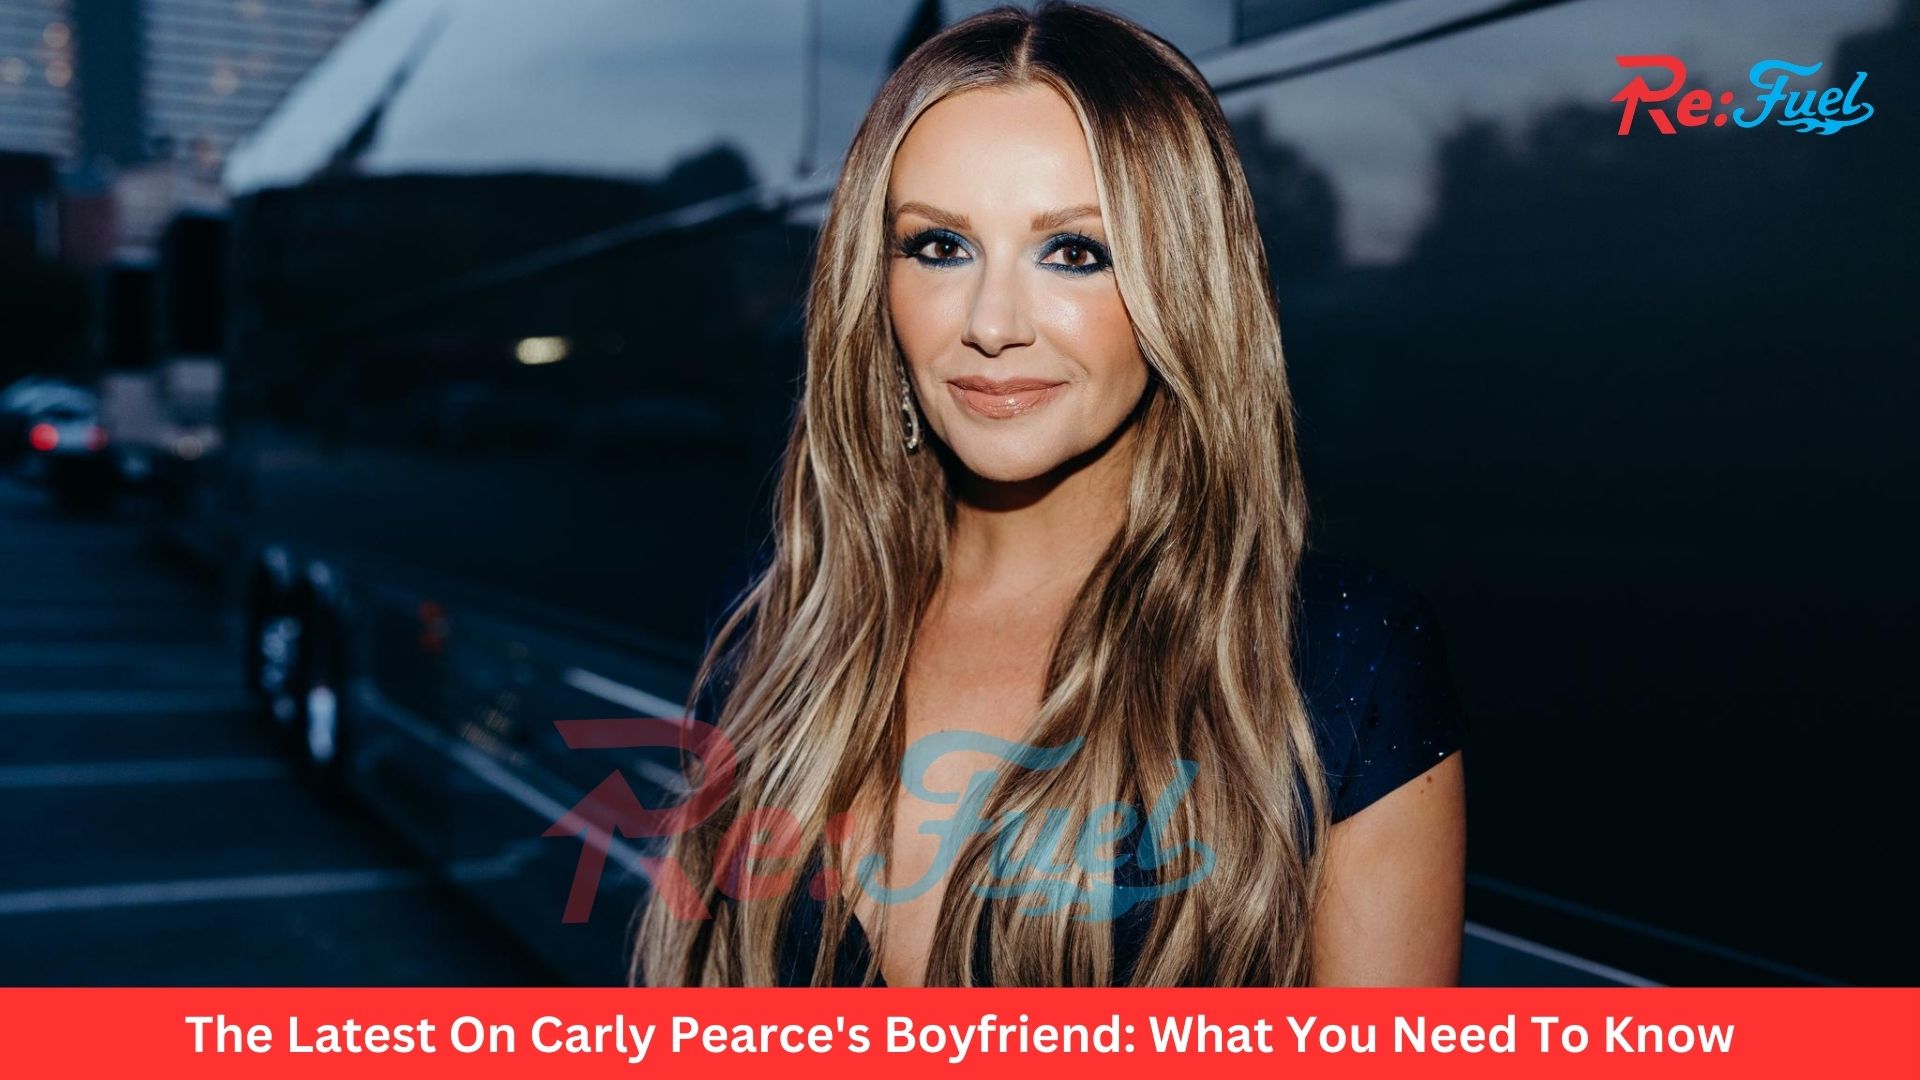 The Latest On Carly Pearce's Boyfriend: What You Need To Know